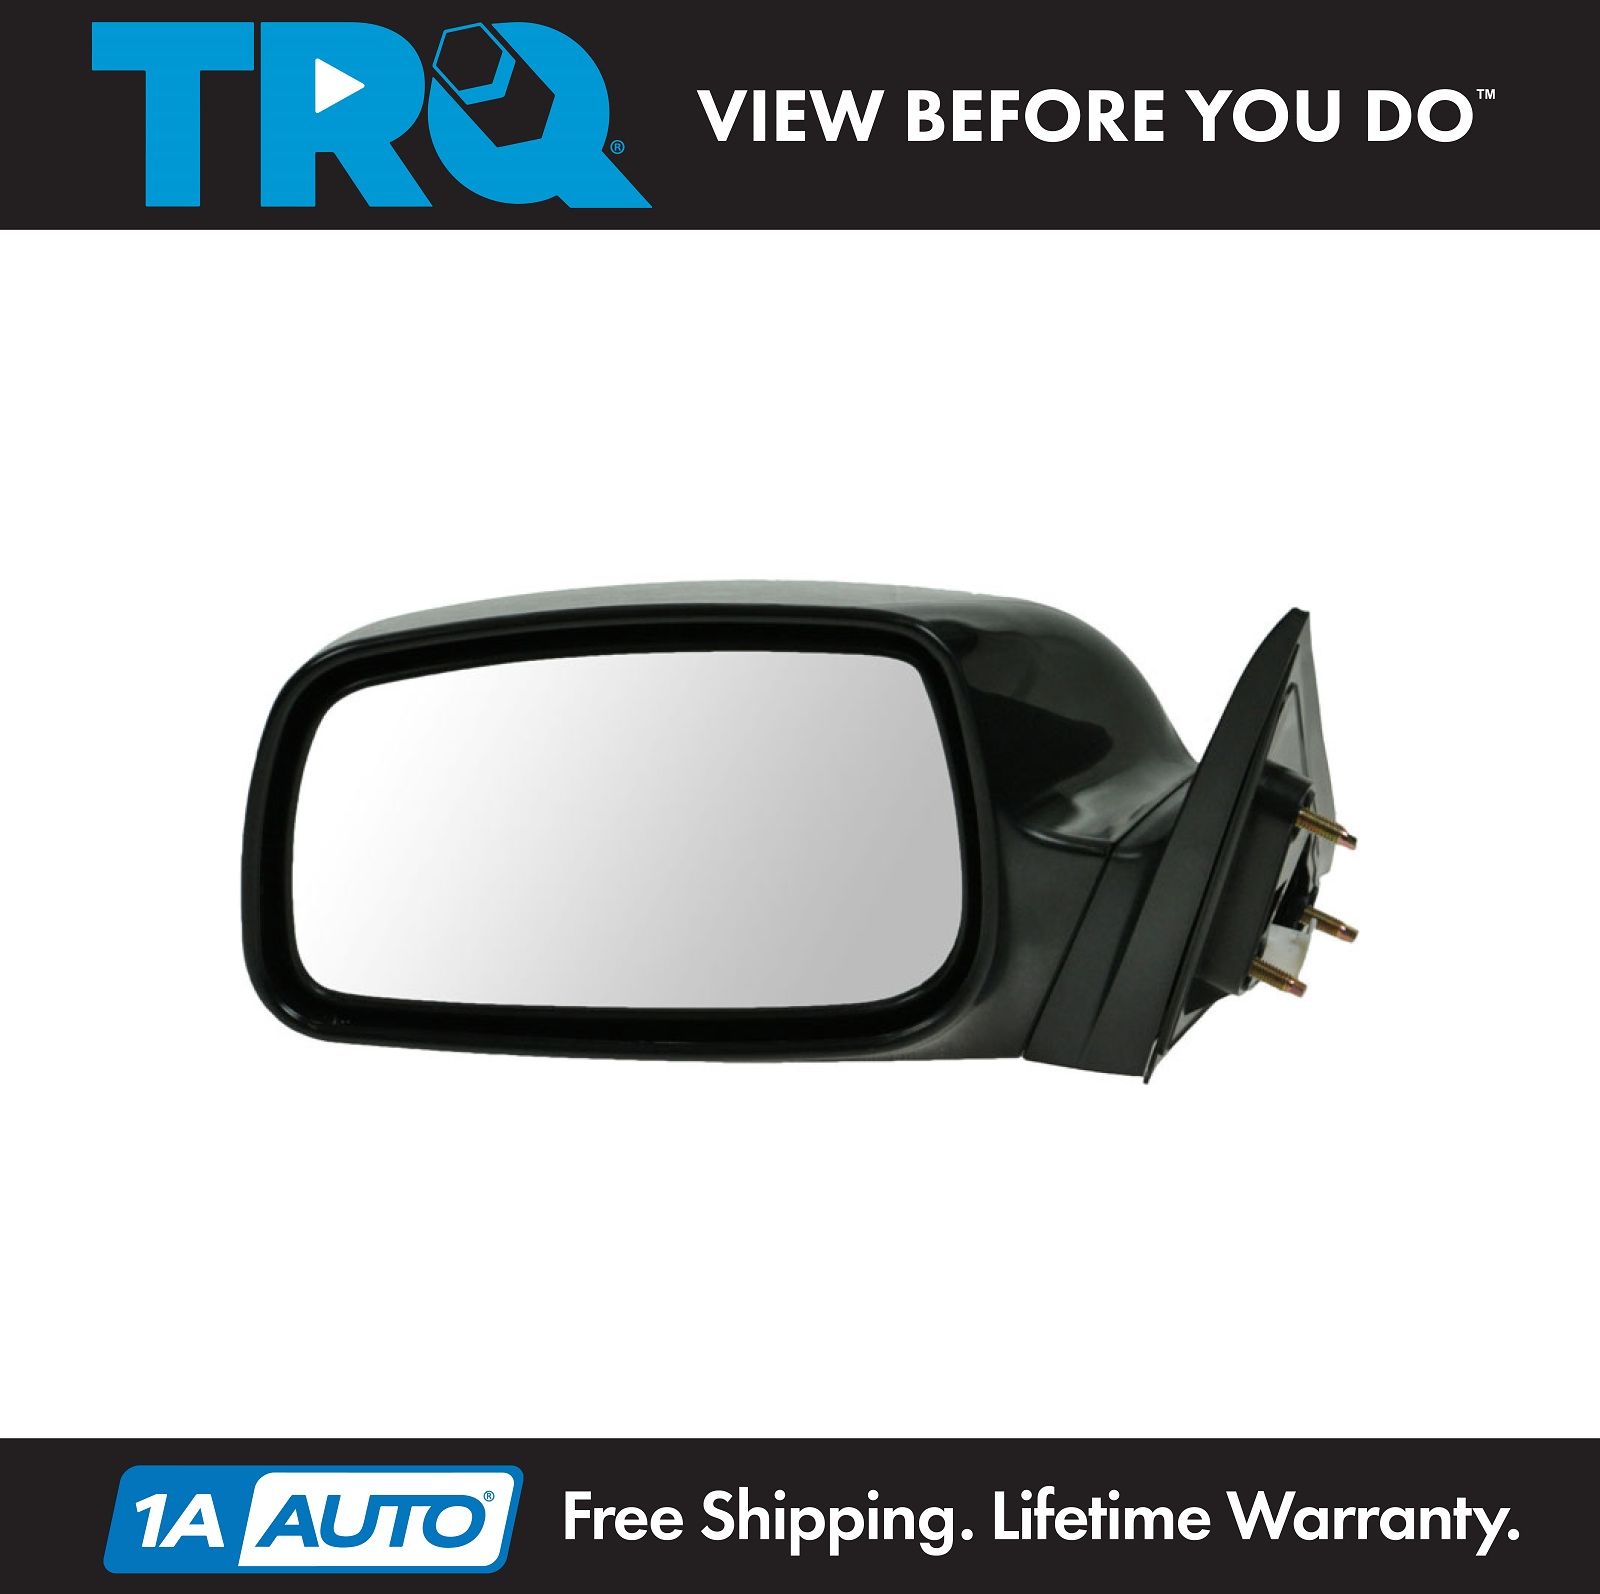 NEW SILVER Drivers Side Left Door Mirror Fits 2002-2006 Camry USA NonHeated 